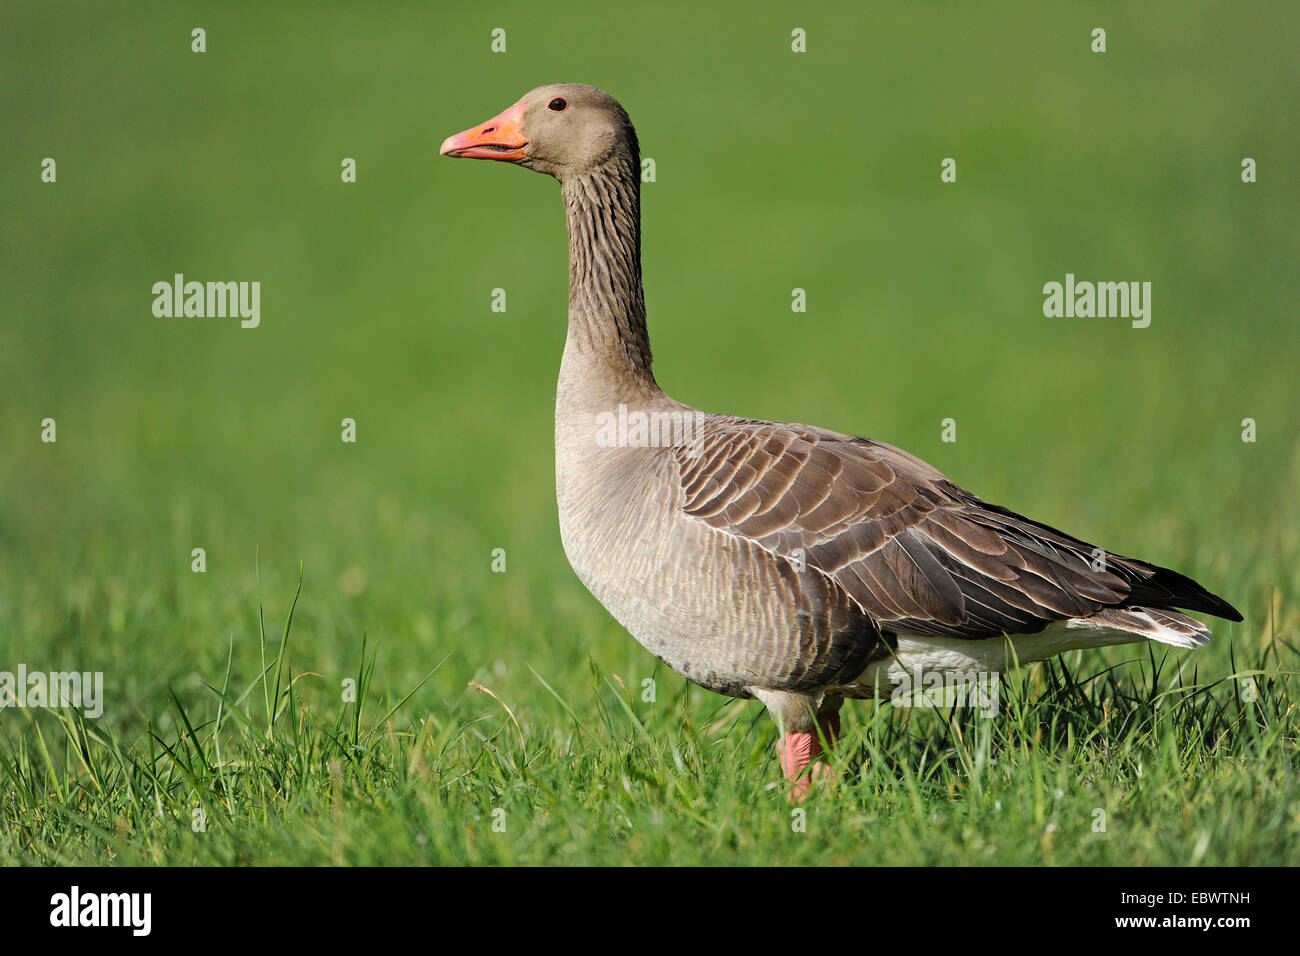 Greylag Goose (Anser anser) standing in a meadow, Thuringia, Germany Stock Photo